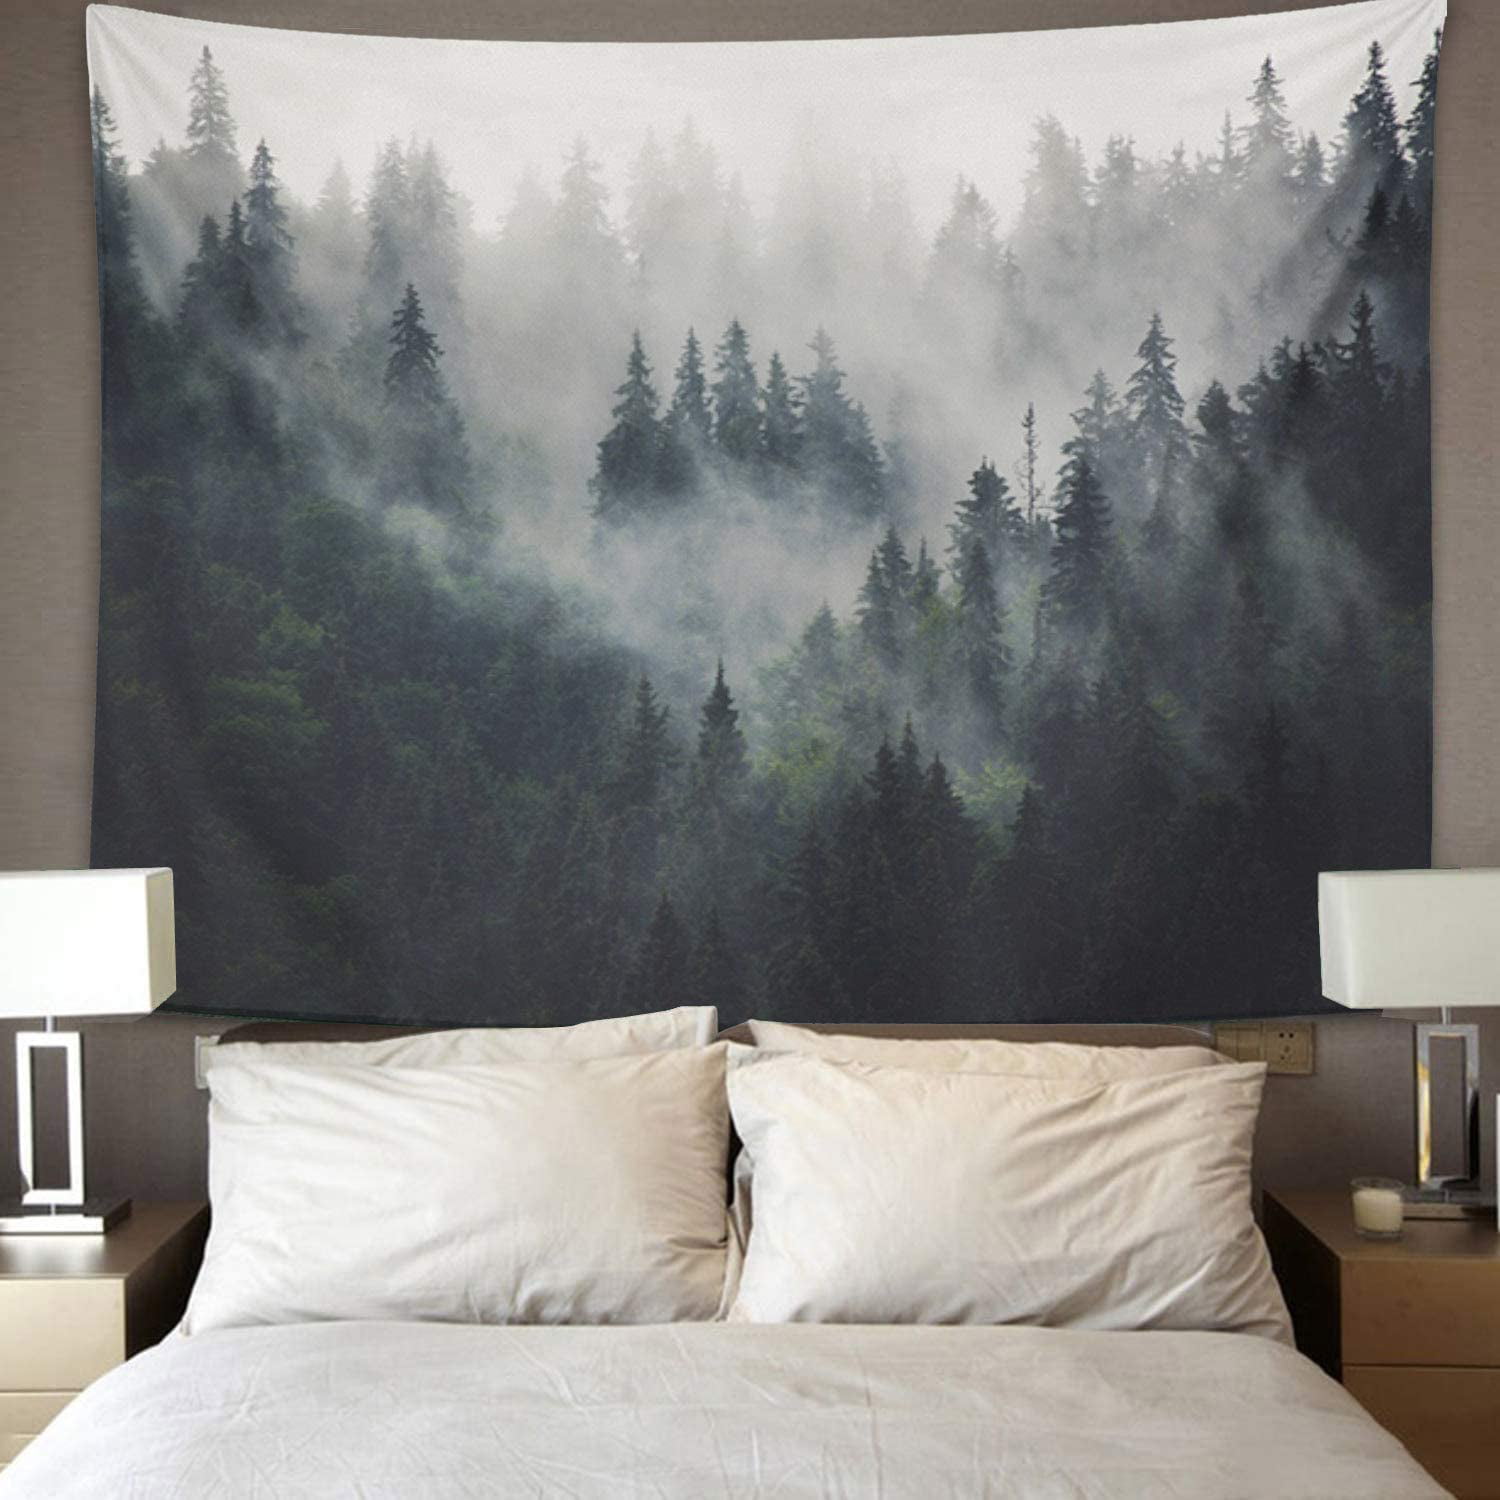 AlliuCoo Wall Tapestries 50 x 60 Inches Green Tree Misty Landscape Fir Forest Hipster Vintage Retro Style Pine Alpine Home Decor Wall Hanging Tapestry Living Room Dorm